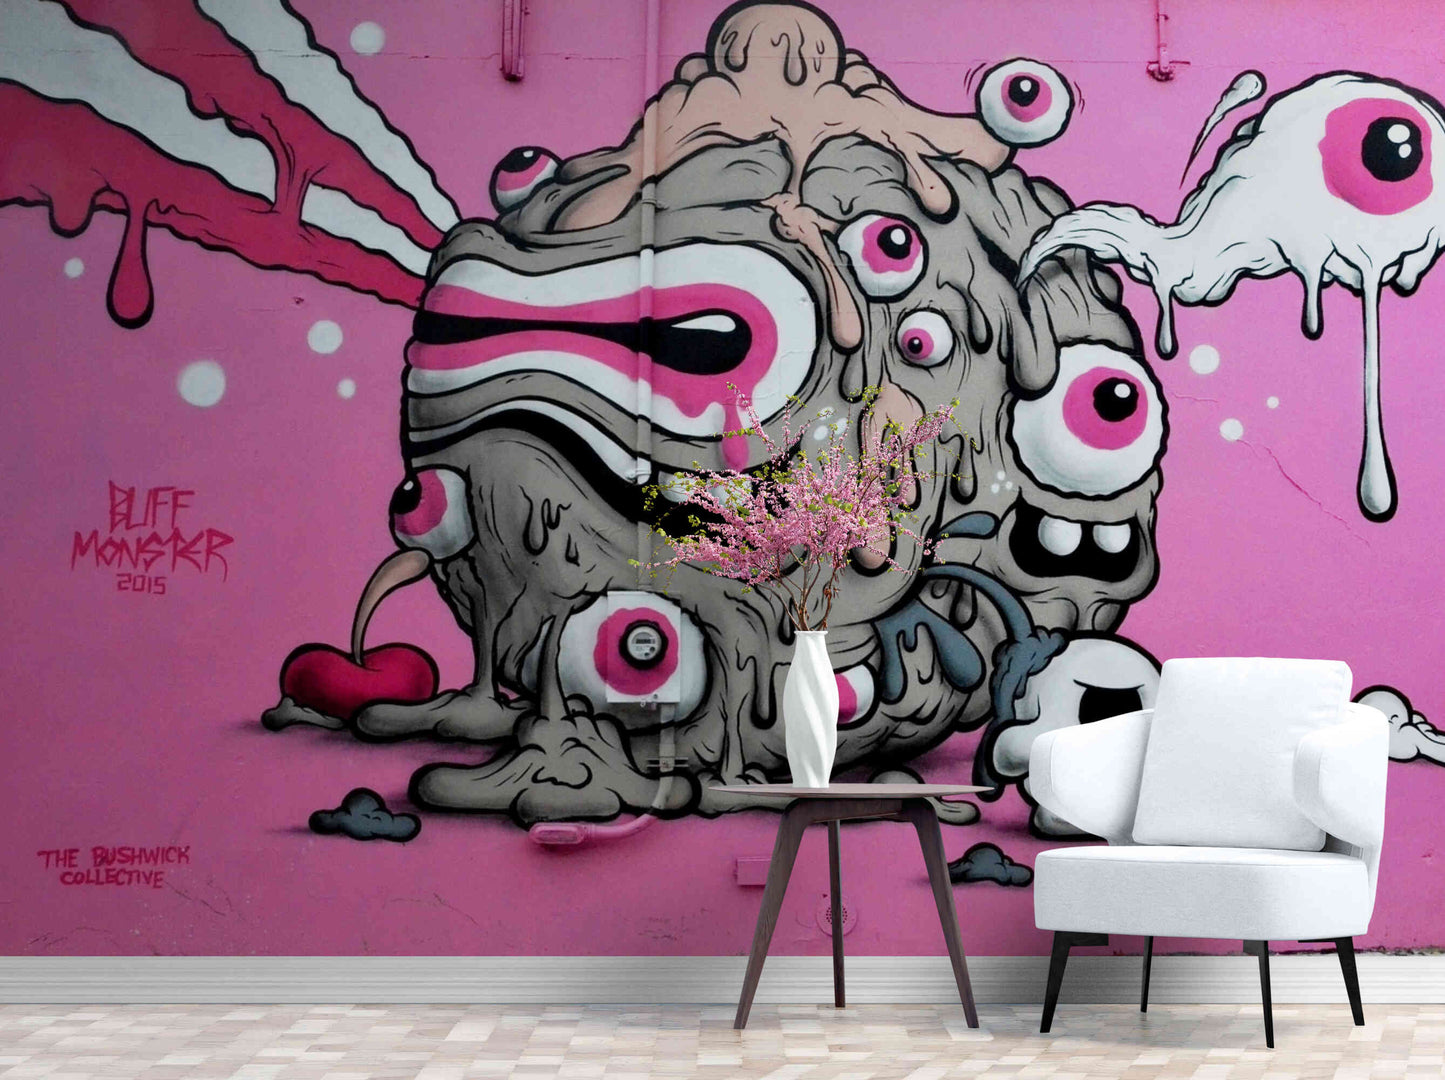 Playful pink graffiti mural wallpaper, perfect for adding a vibrant touch to a girl's bedroom.